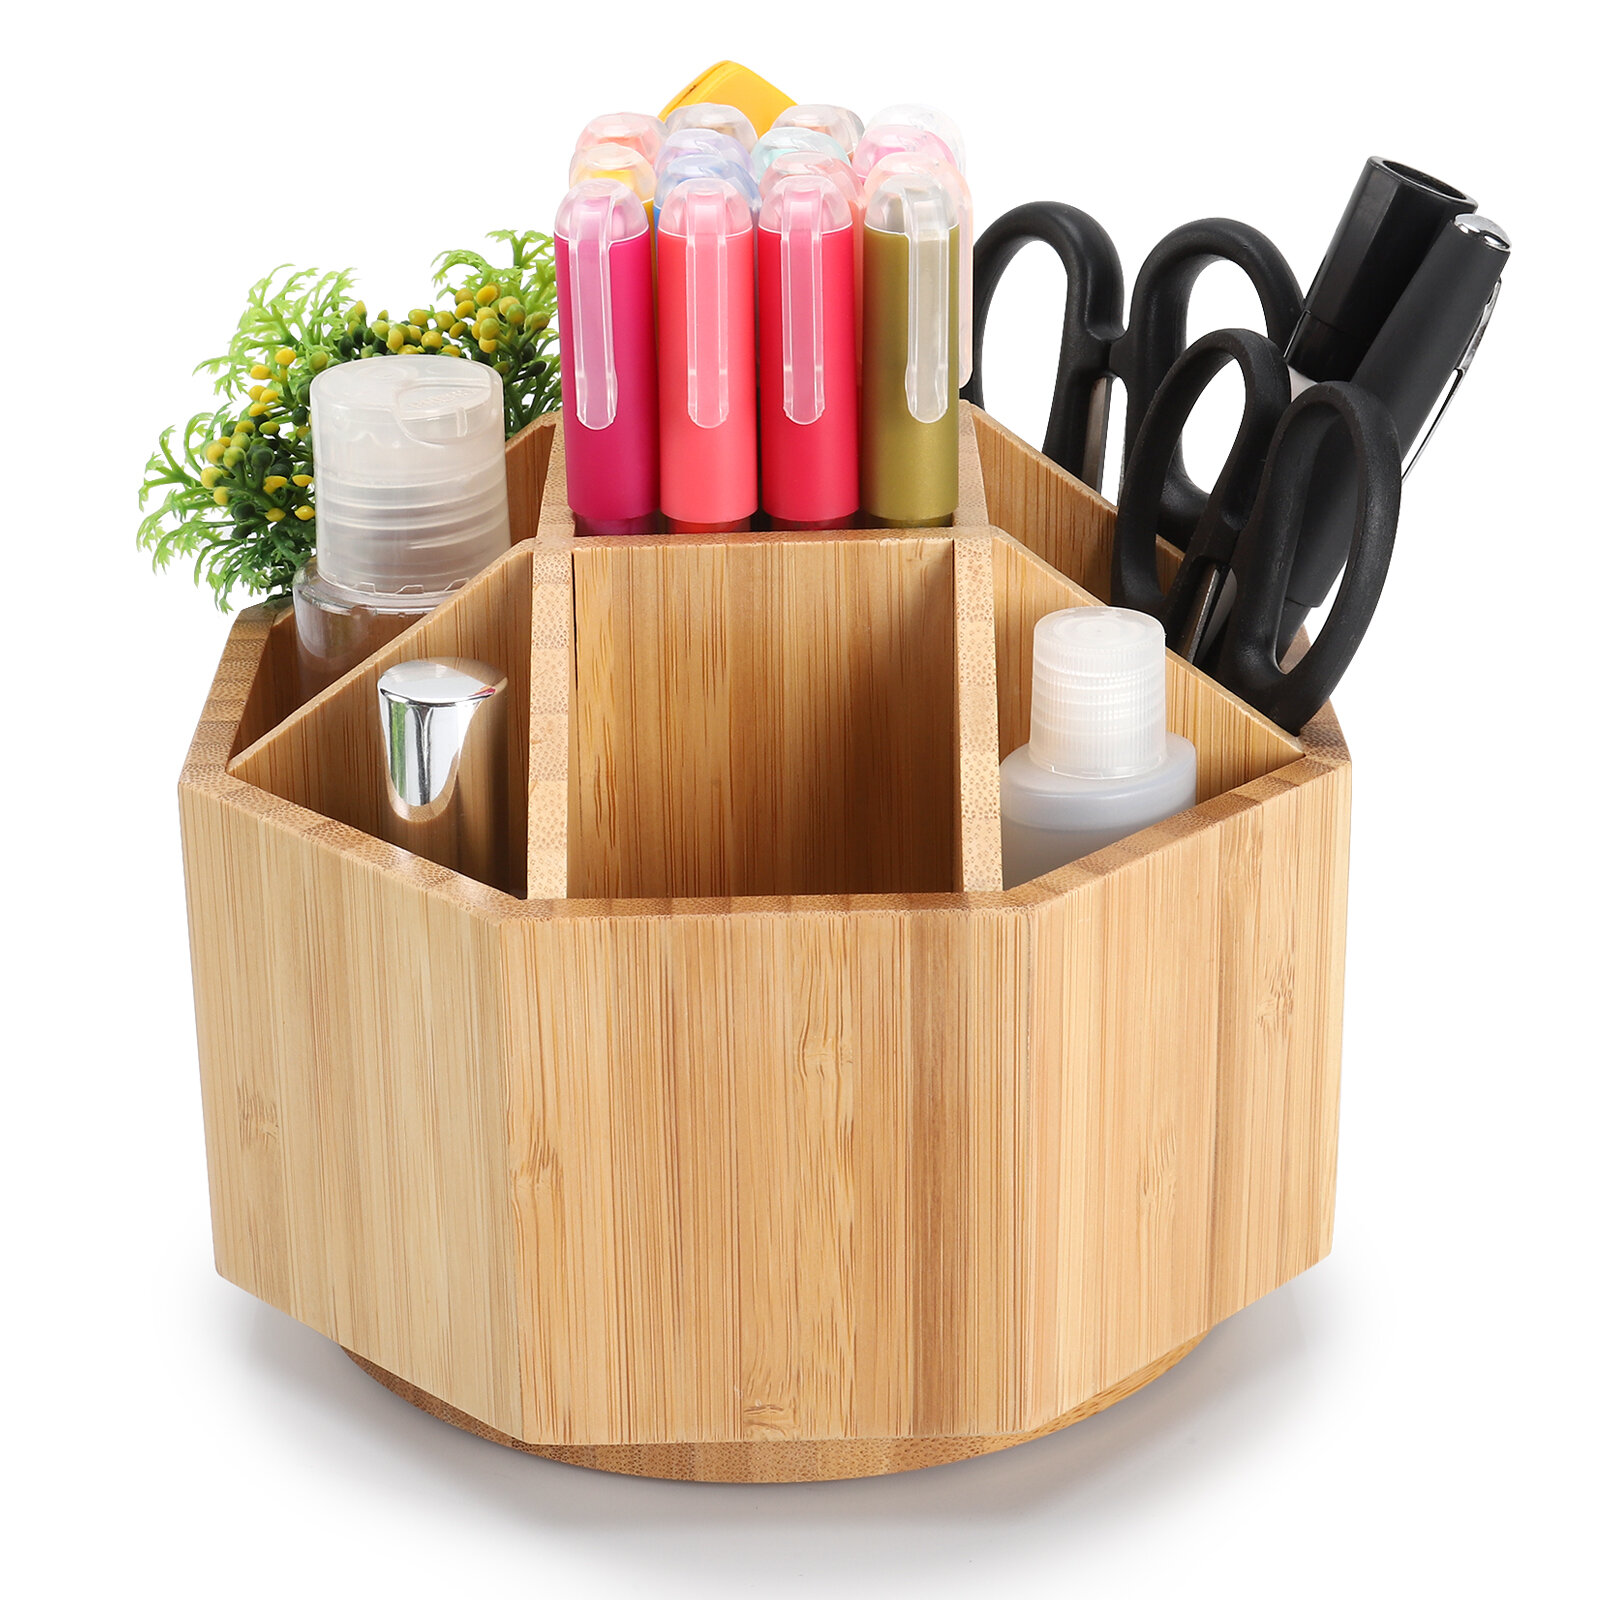 Art Supply Storage and Organizer - 360° Spinning Pen Holder and